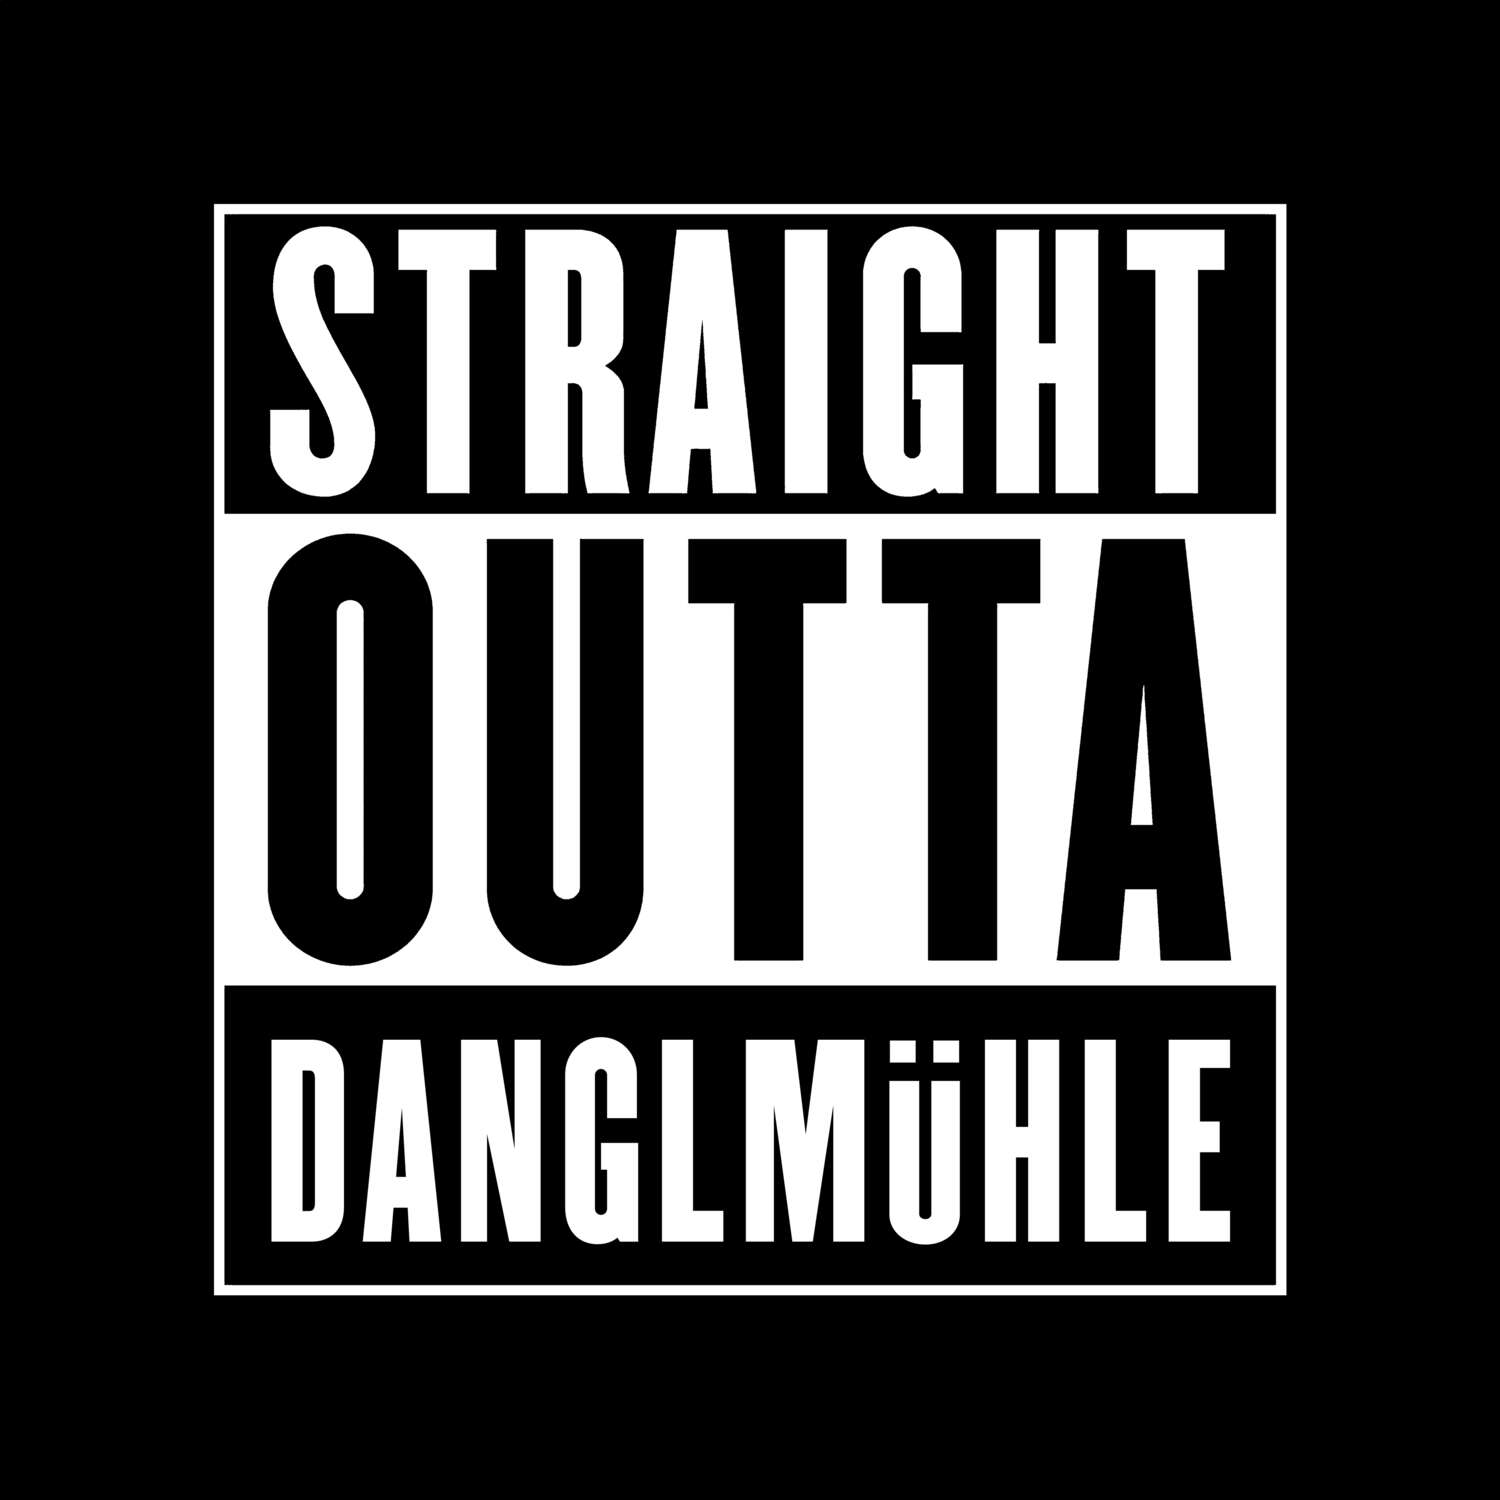 Danglmühle T-Shirt »Straight Outta«